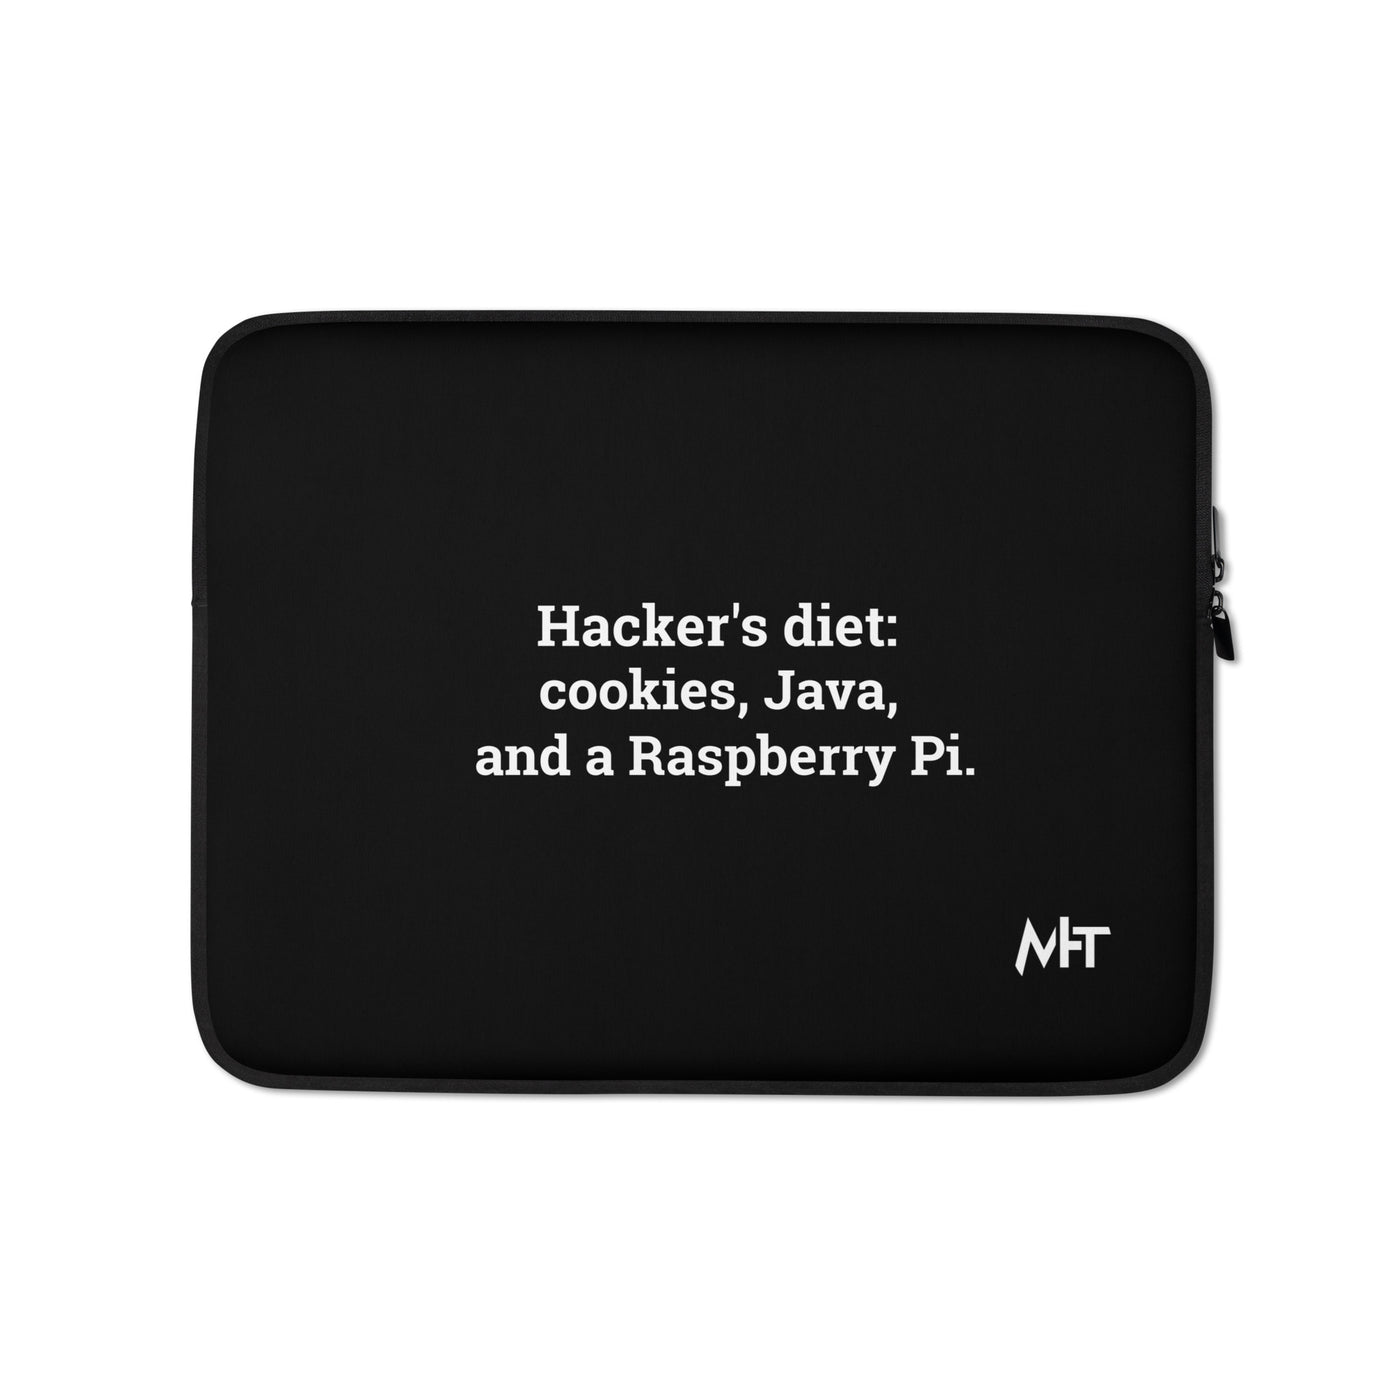 Hackers diet : Cookies, Java and a Raspberry Pi V1 - Laptop Sleeve